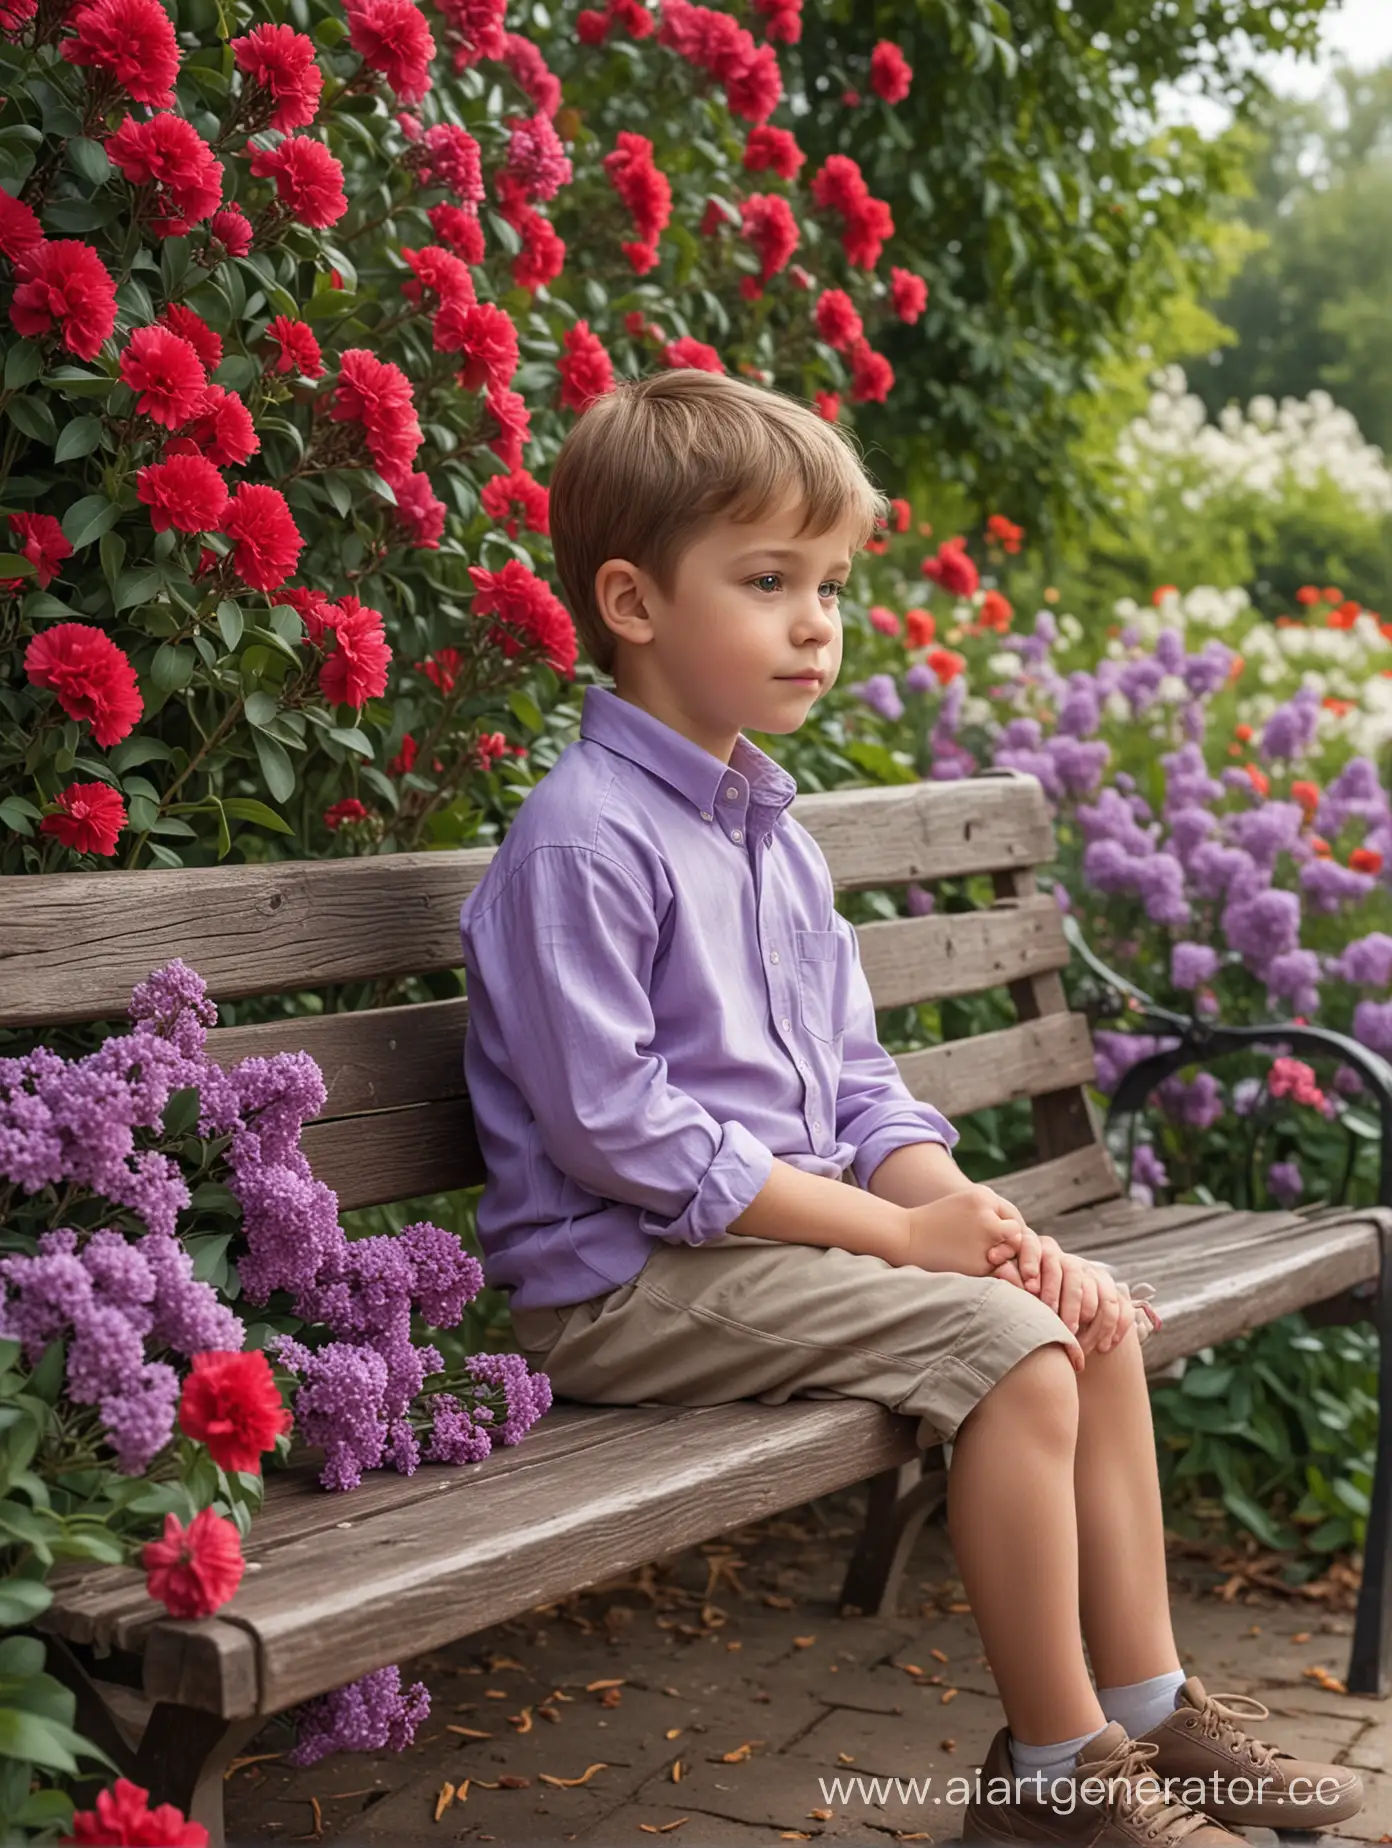 Child-Enjoying-Lilac-Blooms-on-Bench-with-Foreground-Red-Carnations